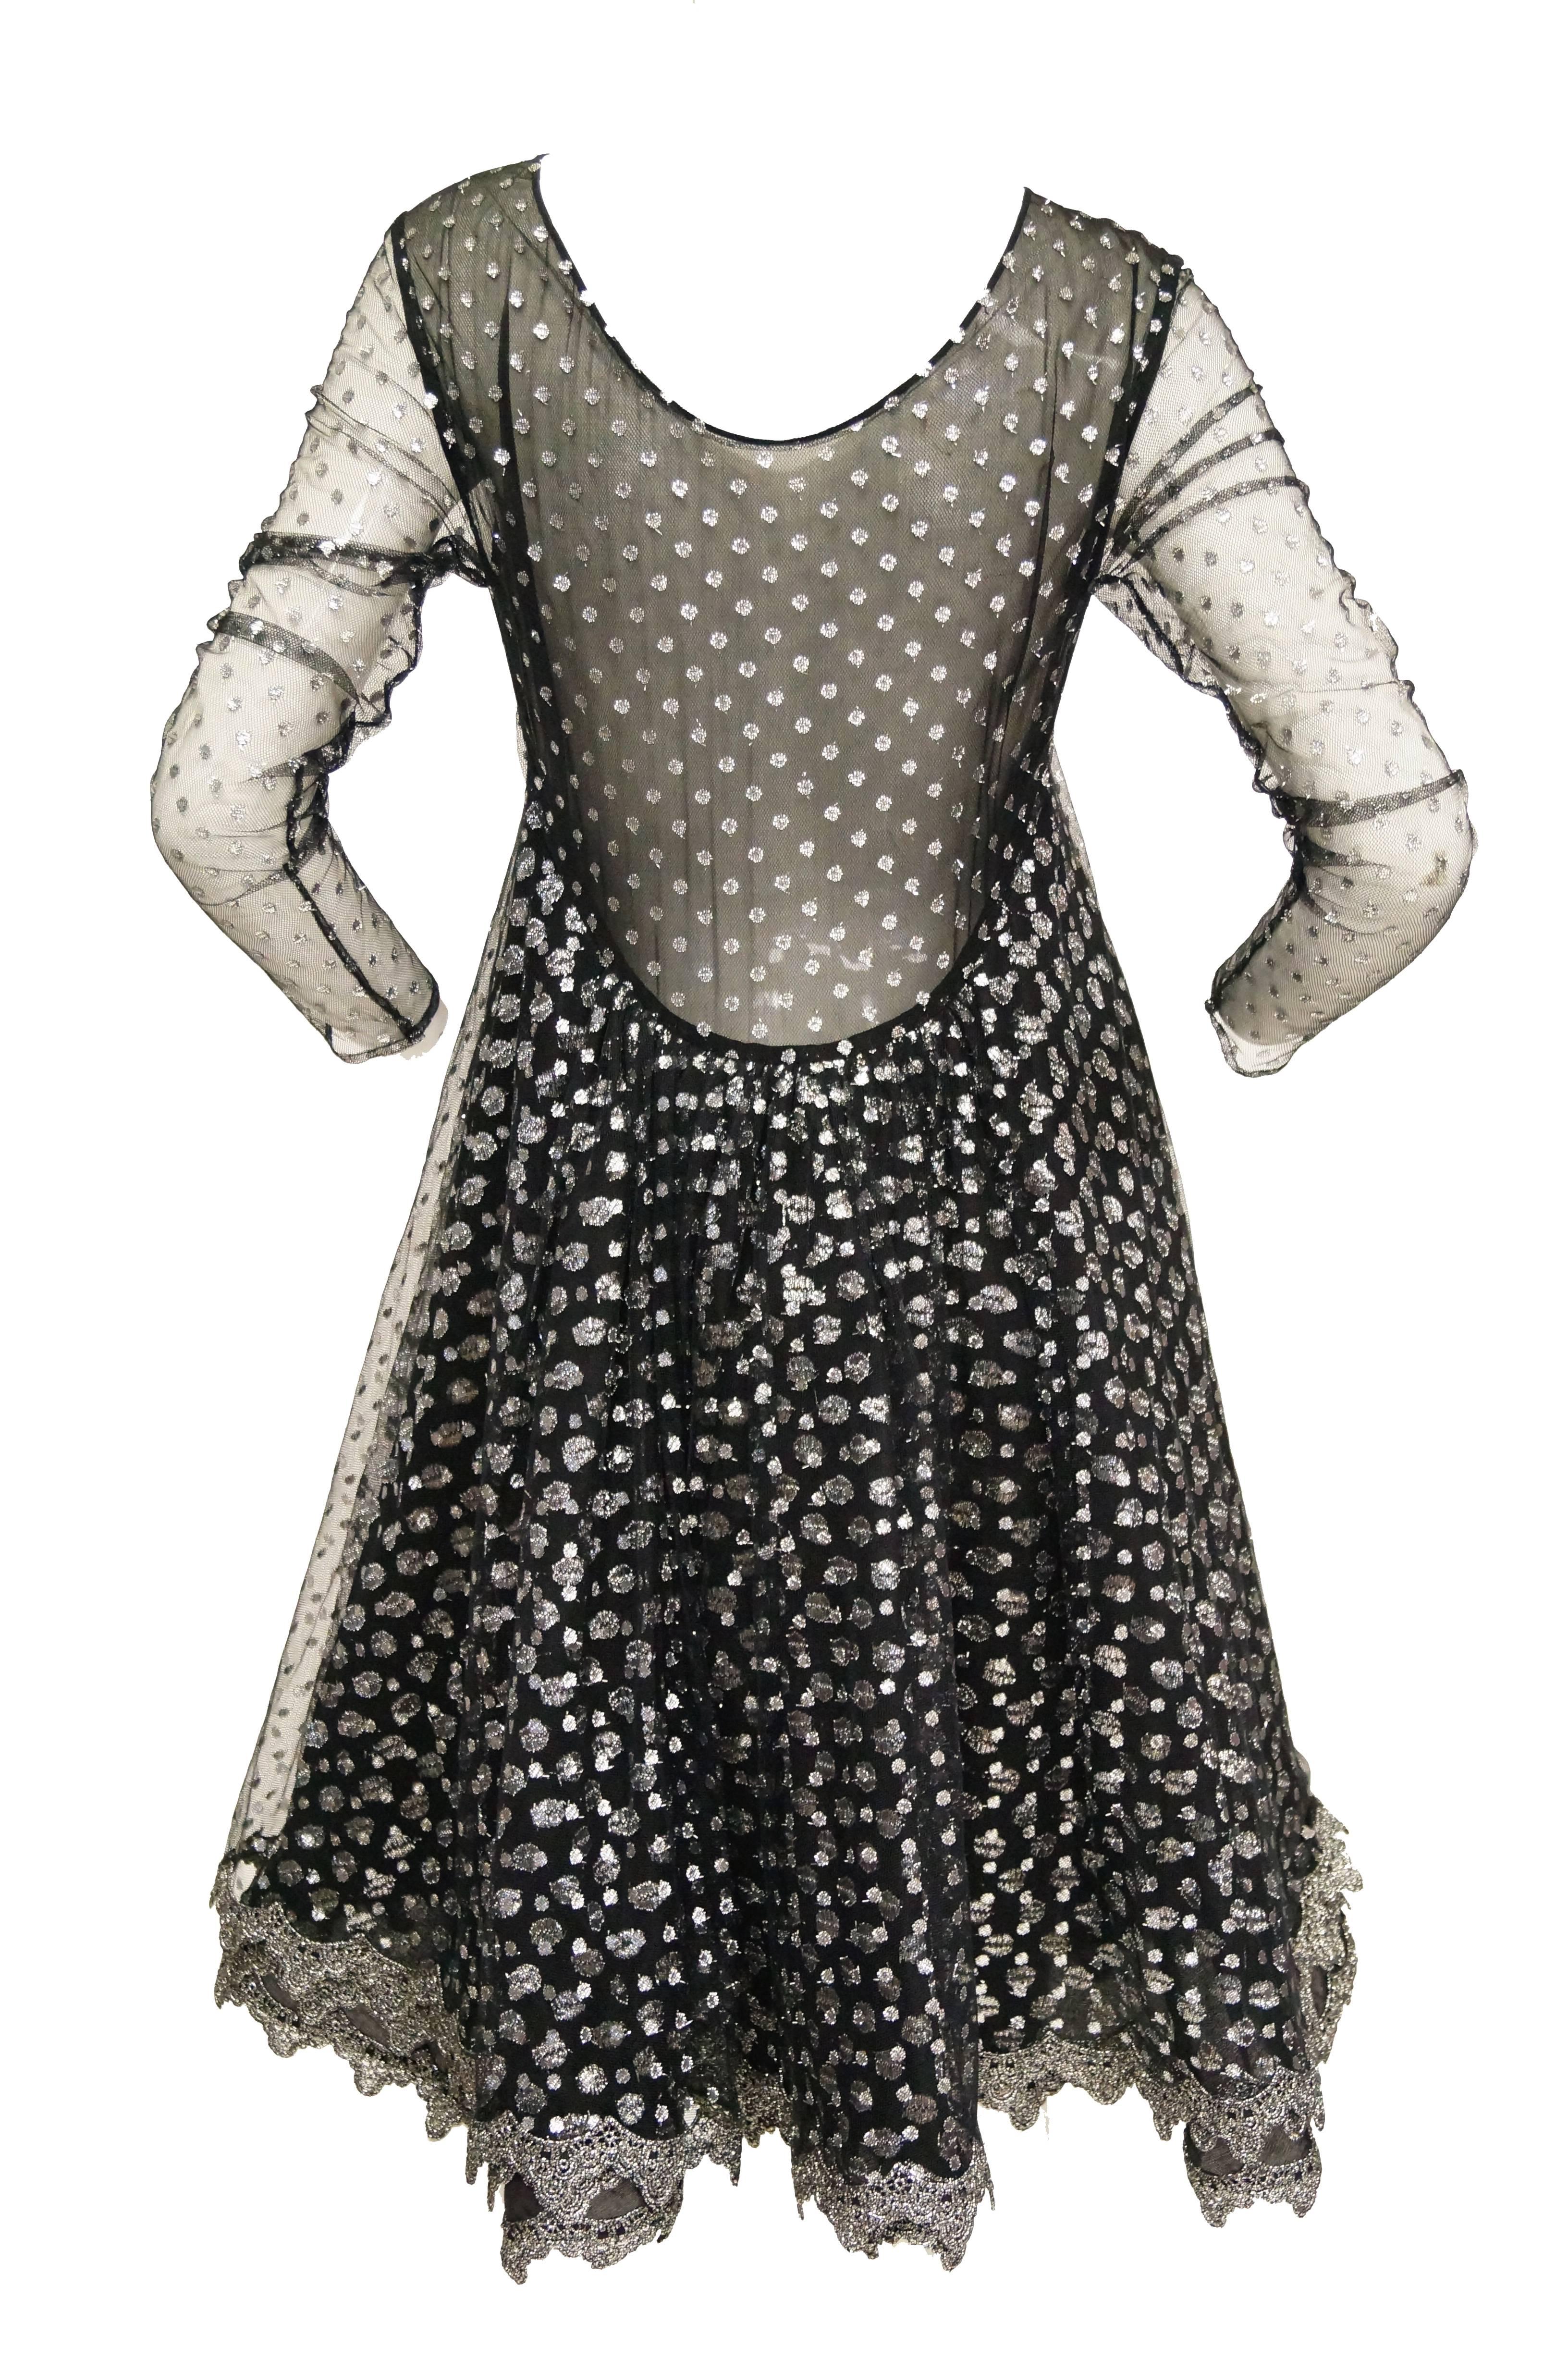 Geoffrey Beene channels the 1960s in this “MR. Beene” made in the early 1990s.  The dress has oh such wonderful movement and shine! 

Two layeers of silver metallic polka dotted tulle, one smaller dots than the other. Sheer sleeves. Attached sewn in